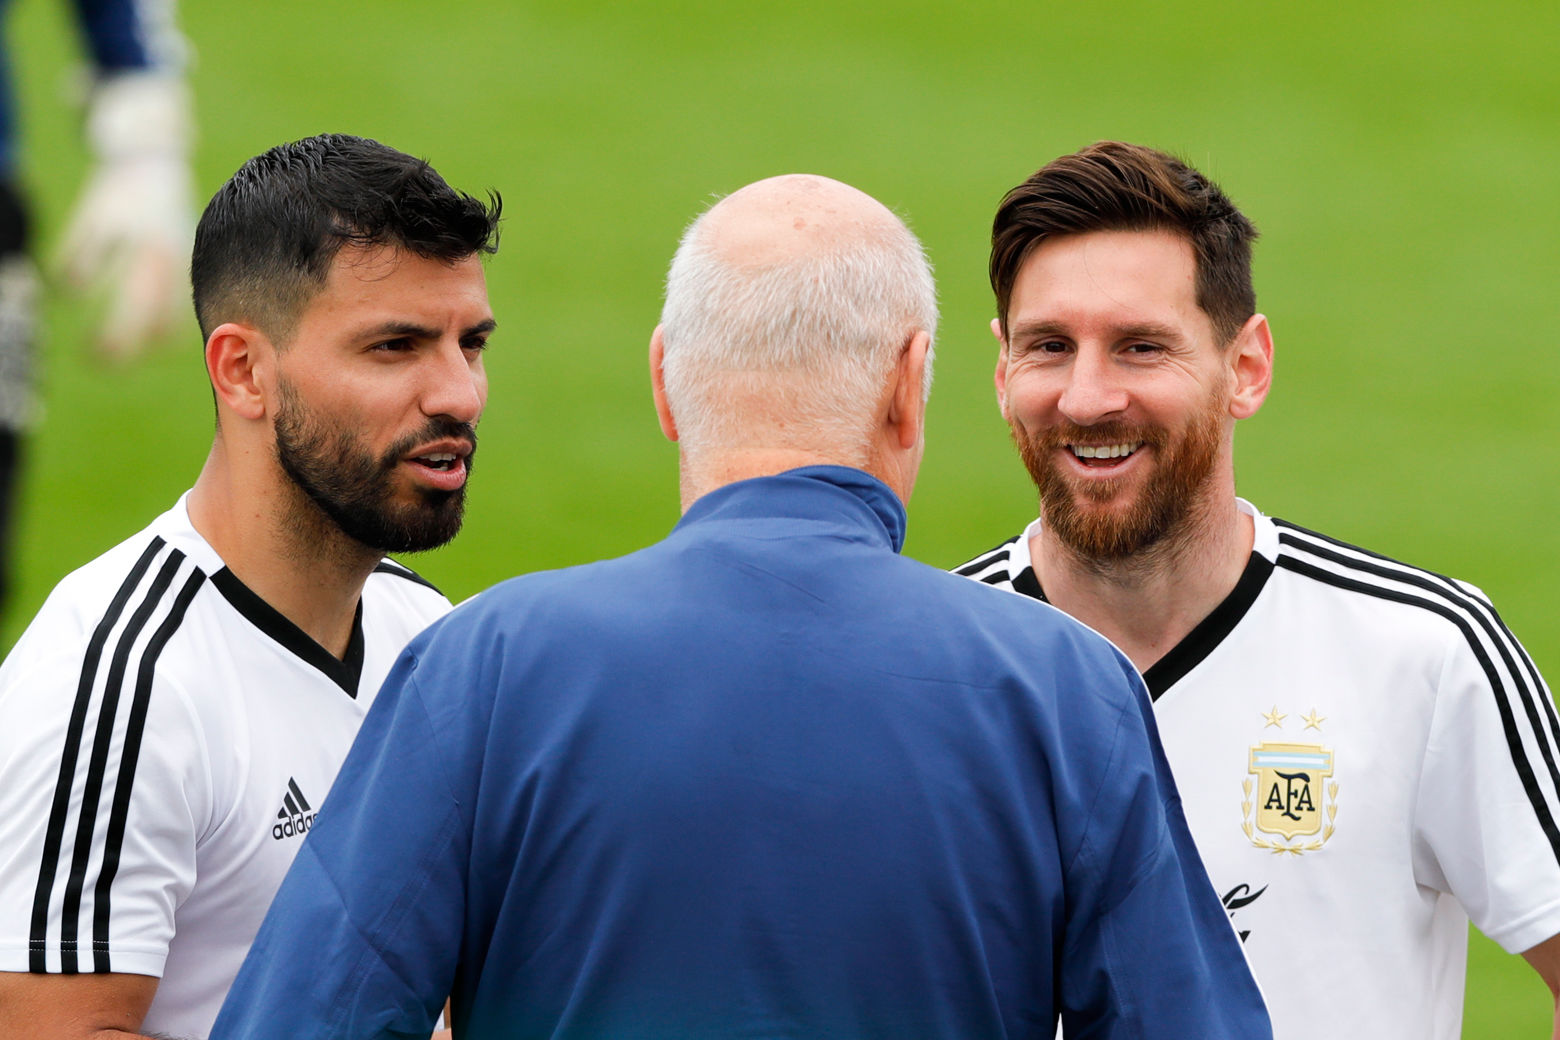 Lionel Messi, right, and Sergio Aguero talk to a team assistant during a training session of Argentina at the 2018 soccer World Cup in Bronnitsy, Russia, Wednesday, June 13, 2018. (AP Photo/Ricardo Mazalan)